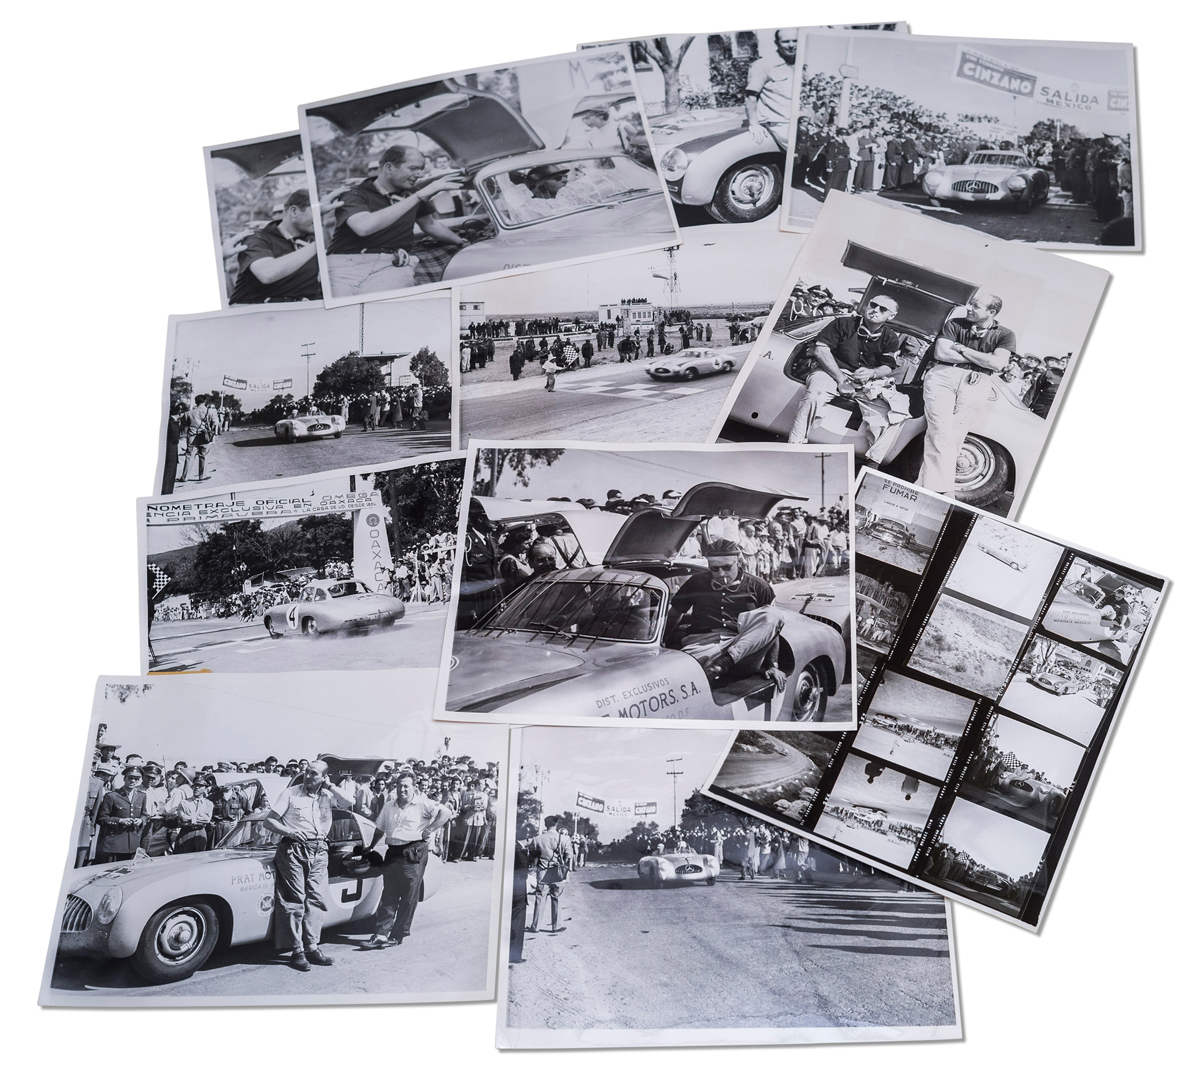 Mercedes-Benz La Carrera Panamericana Photographs 1952 offered at RM Sotheby's The Mitosinka Collection online auction 2020